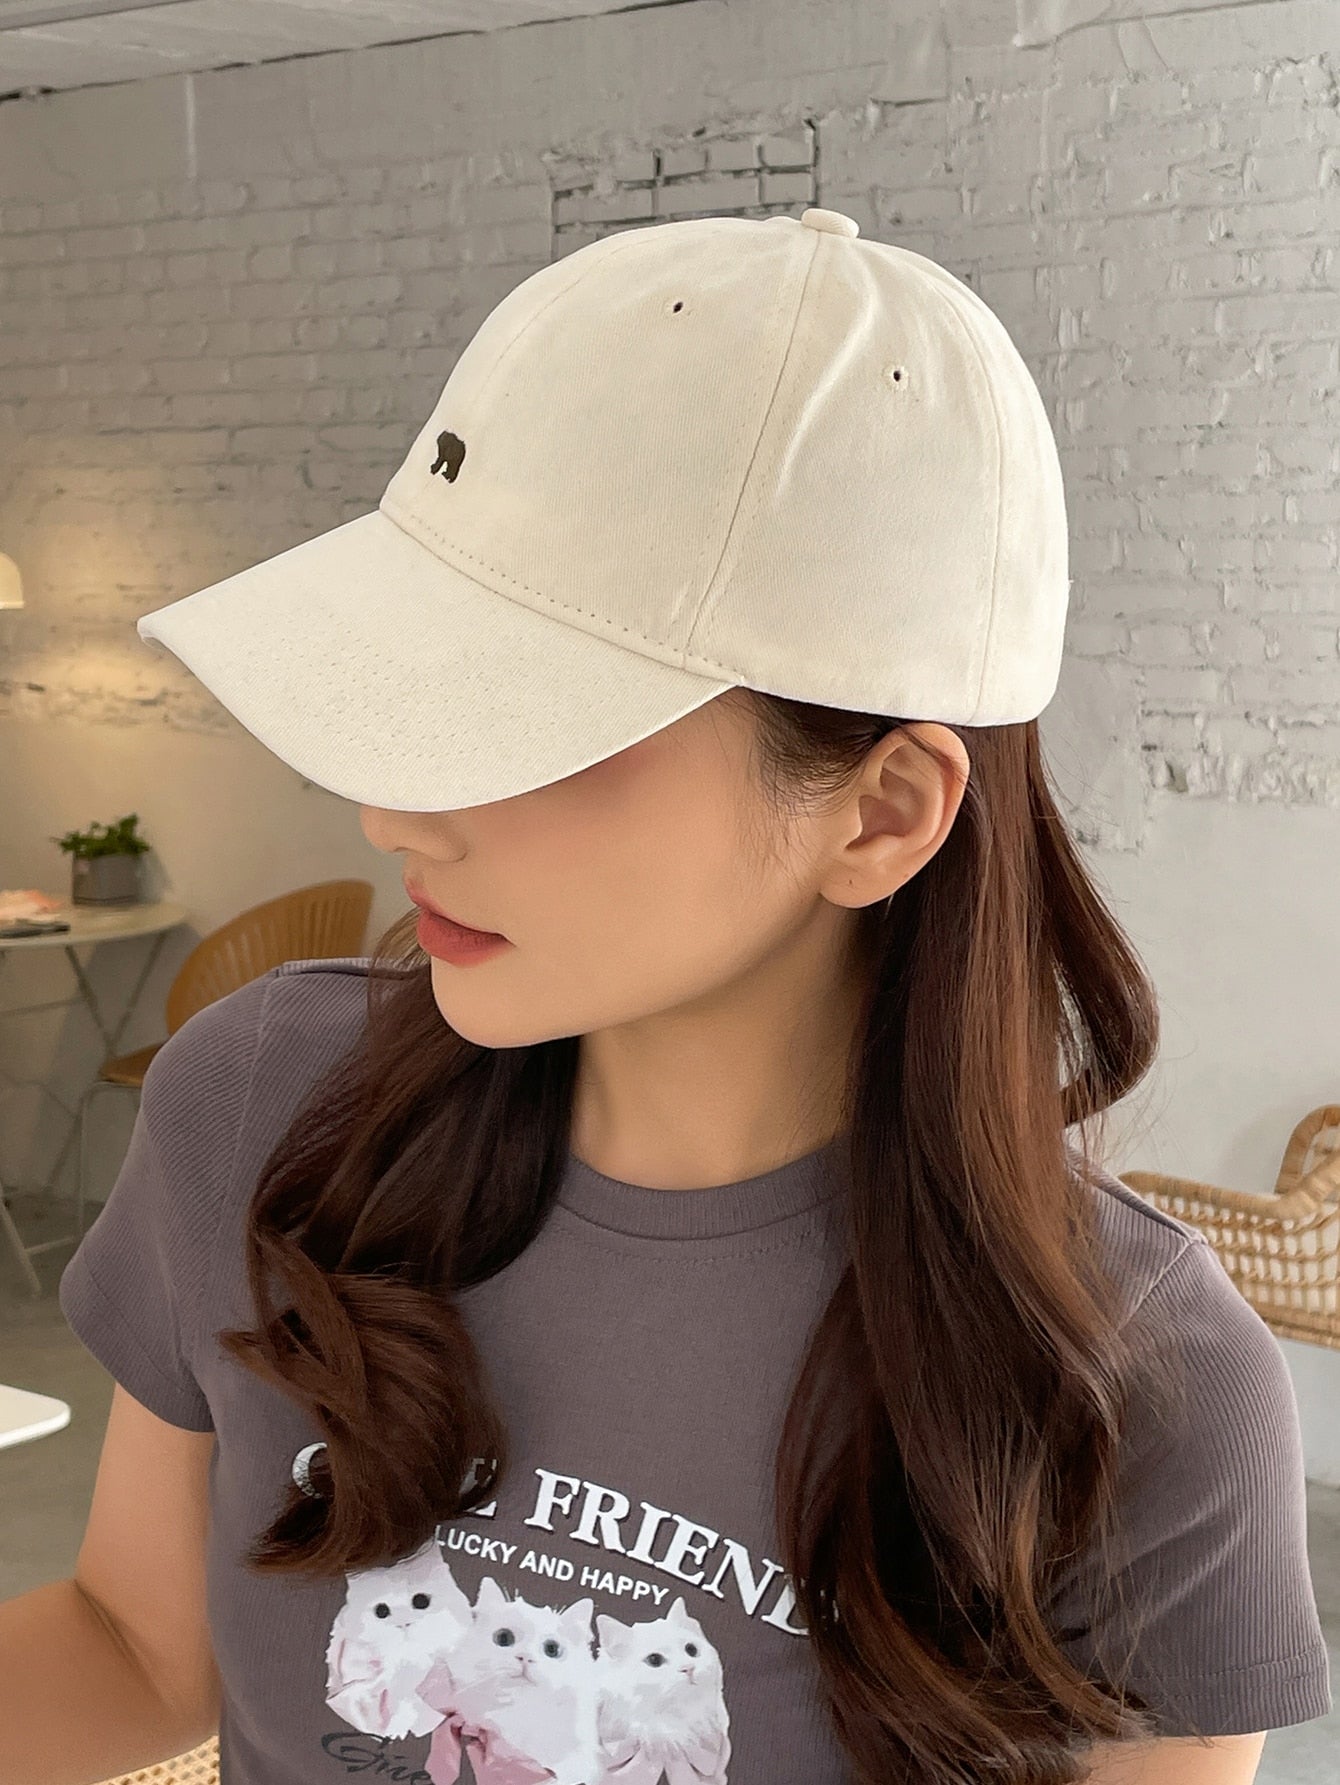 1pc Women Bear Embroidered Fashion Baseball Cap For Daily Life Casual